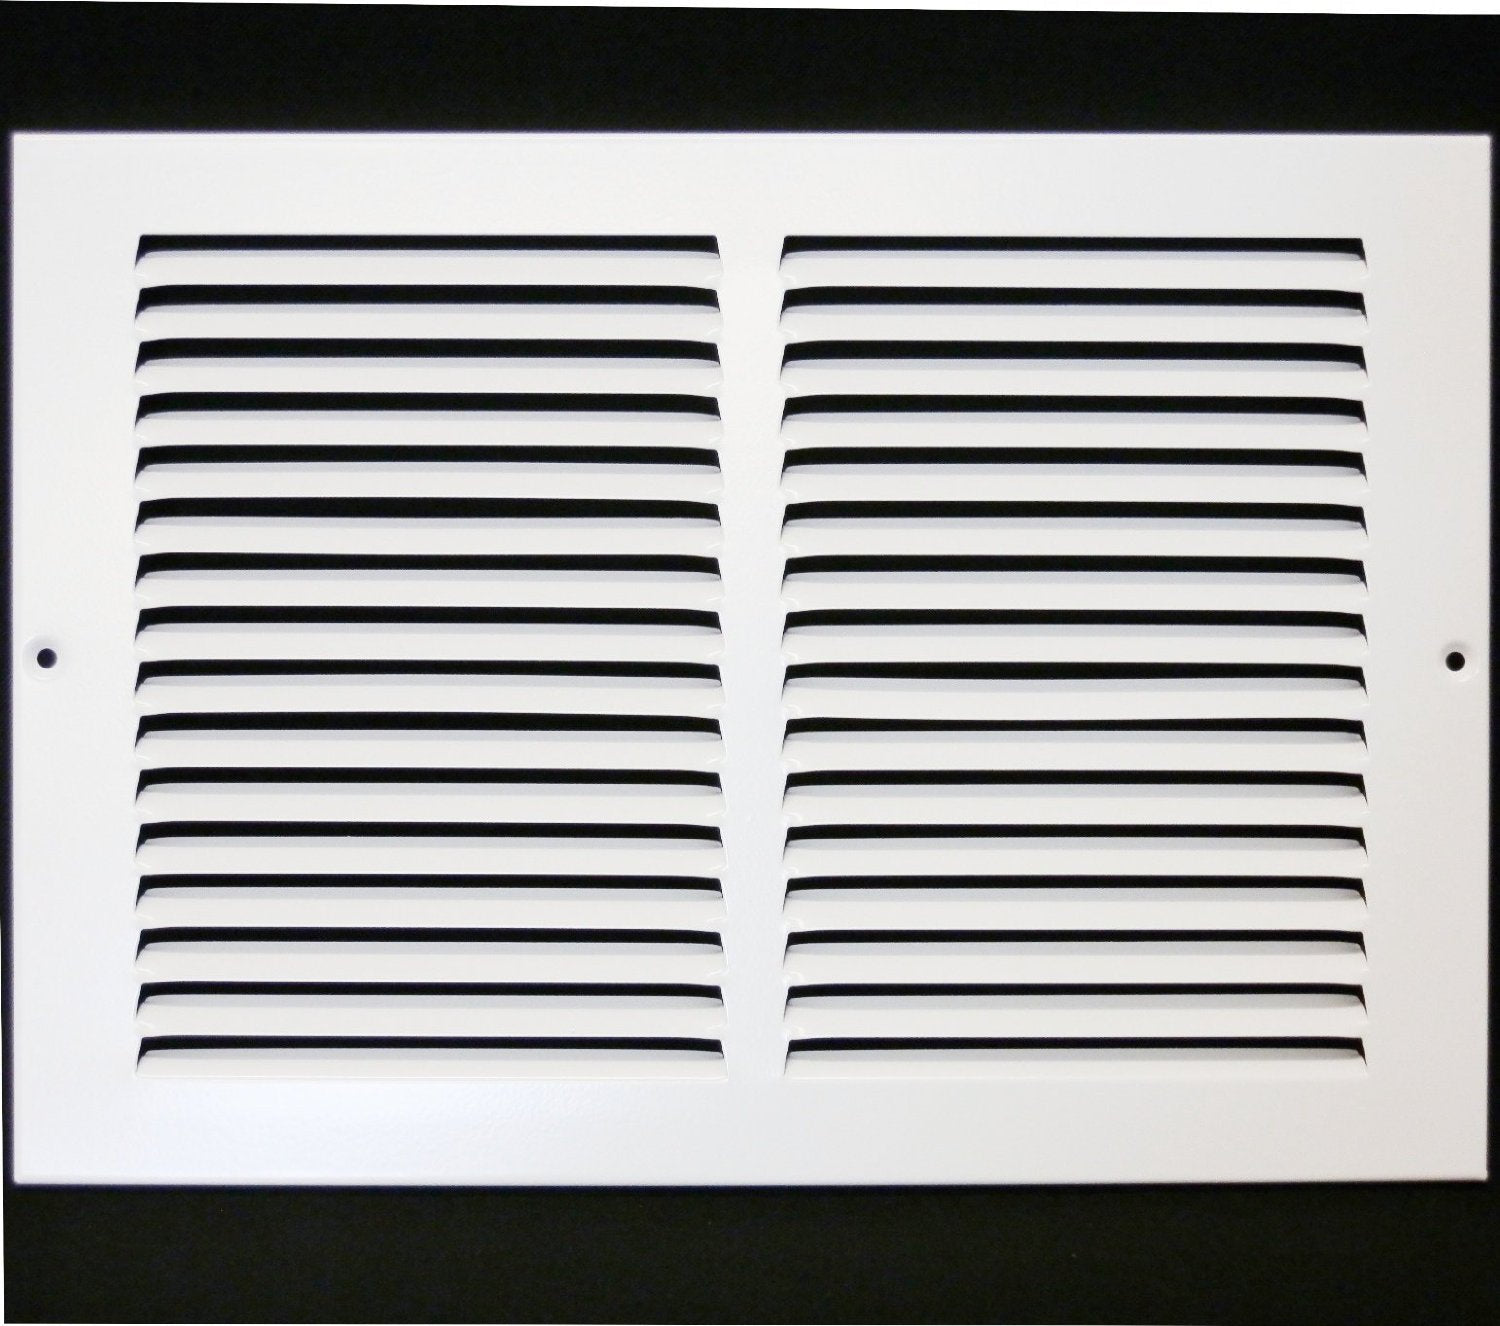 12" X 8" Air Vent Return Grilles - Sidewall and Ceiling - Steel